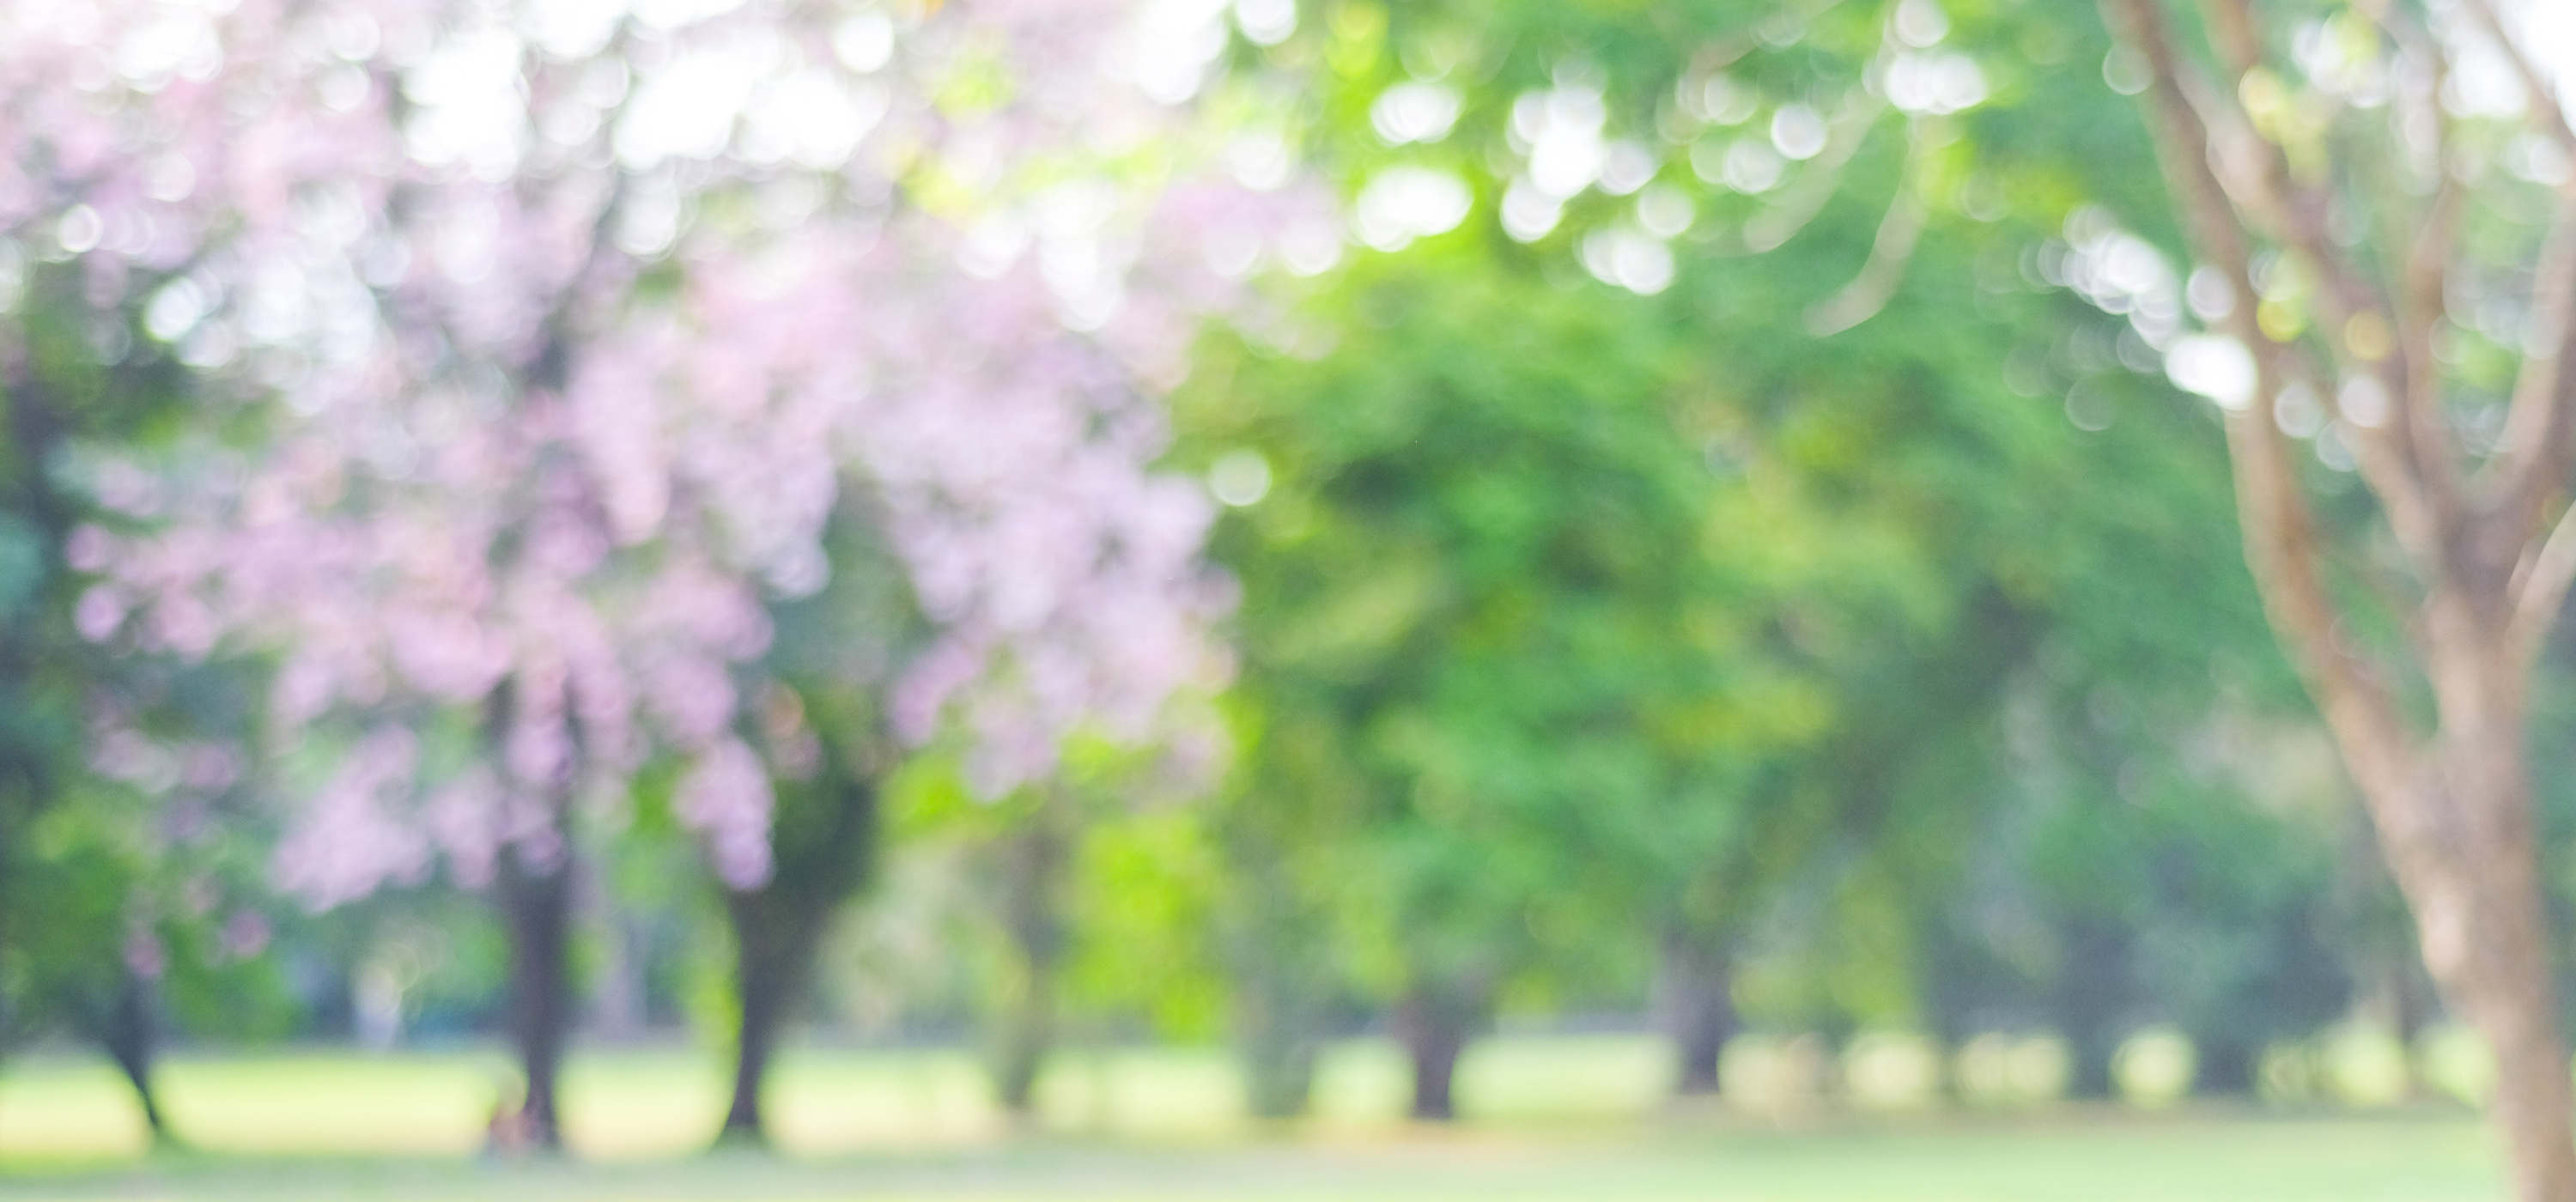 Blurred spring and summer nature background, Blur greenry park outdoor background